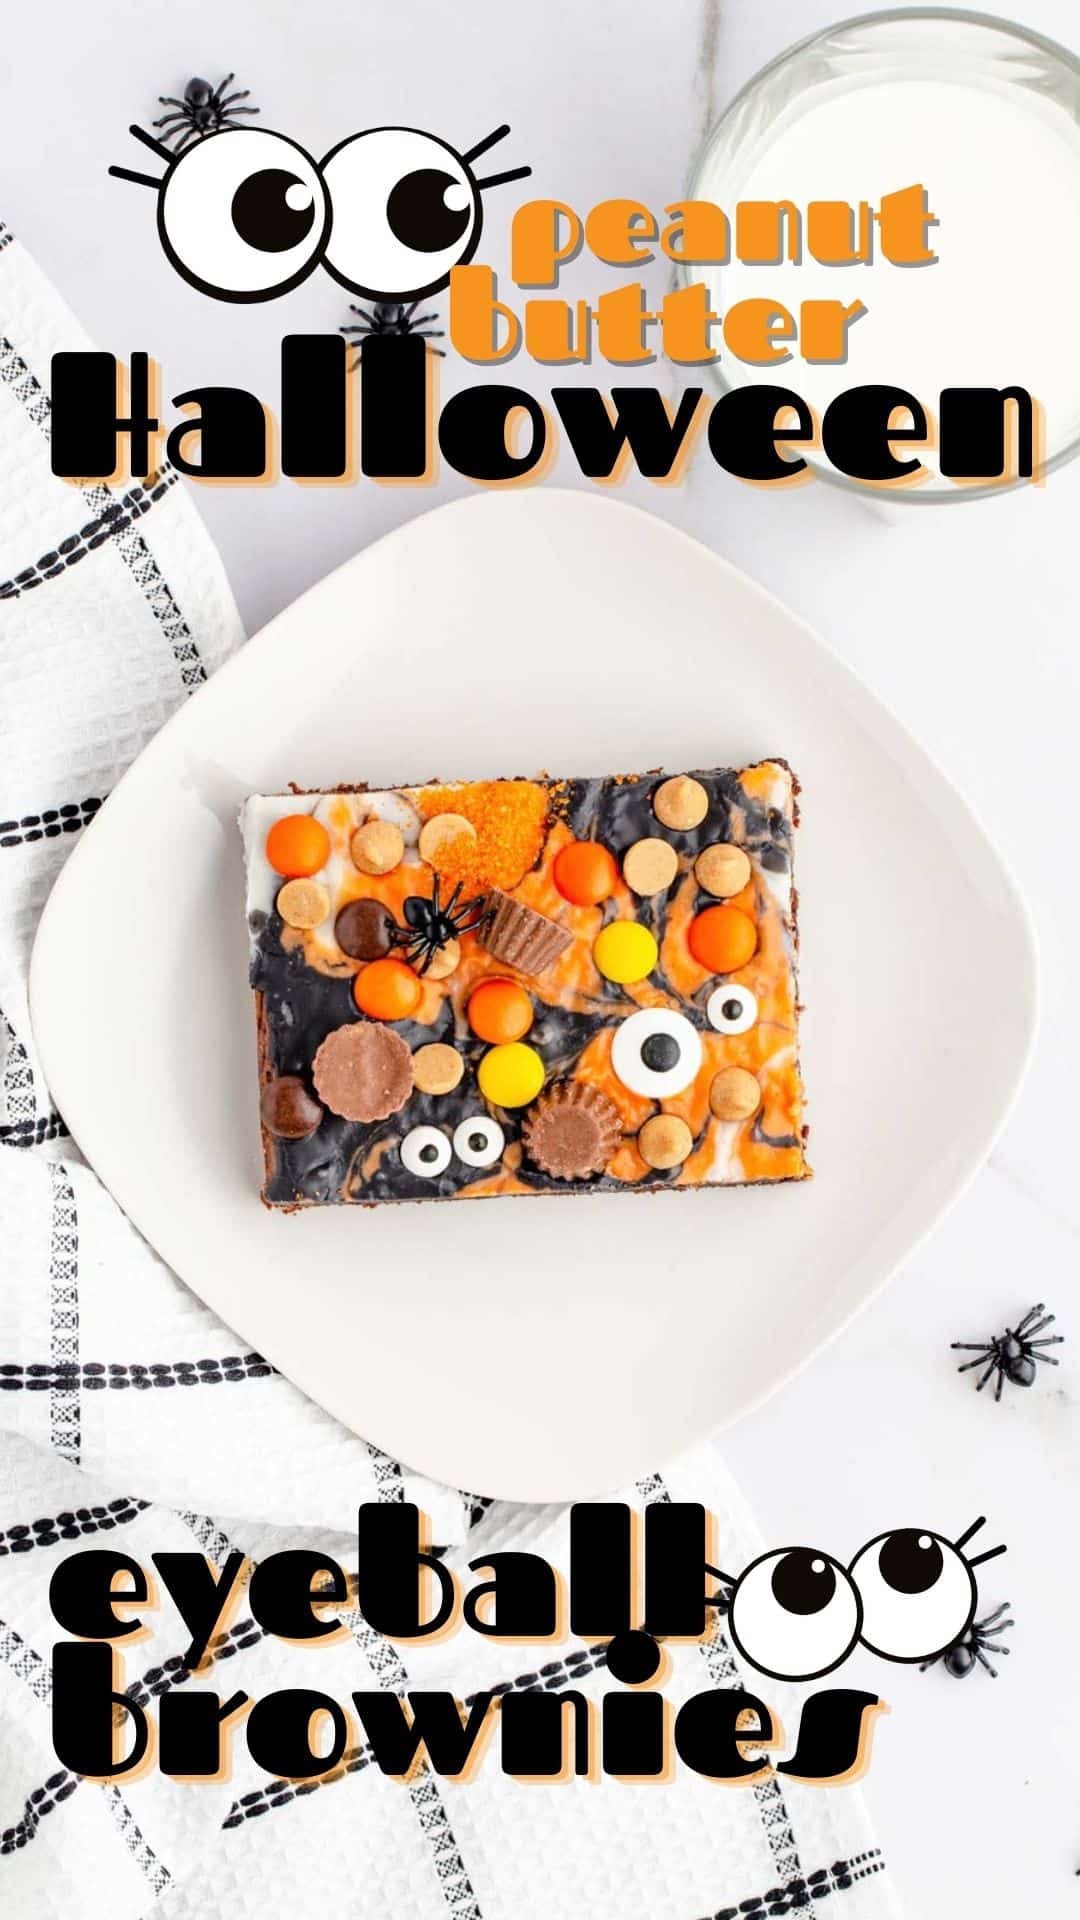 Halloween Peanut Butter Brownies with Eyeballs - Soulfully Made